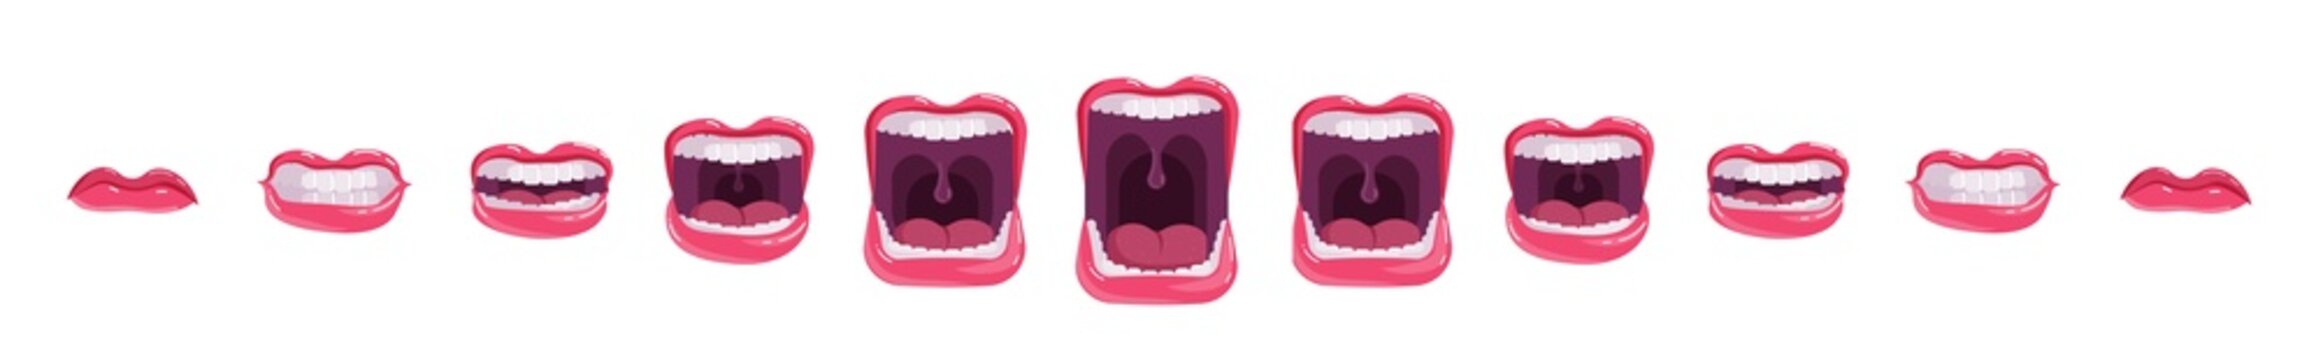 Screaming shouting mouth with teeth and tongue extended set. Singing yawning human lip in various stage of opening for different wow emotion expression vector illustration isolated on white background